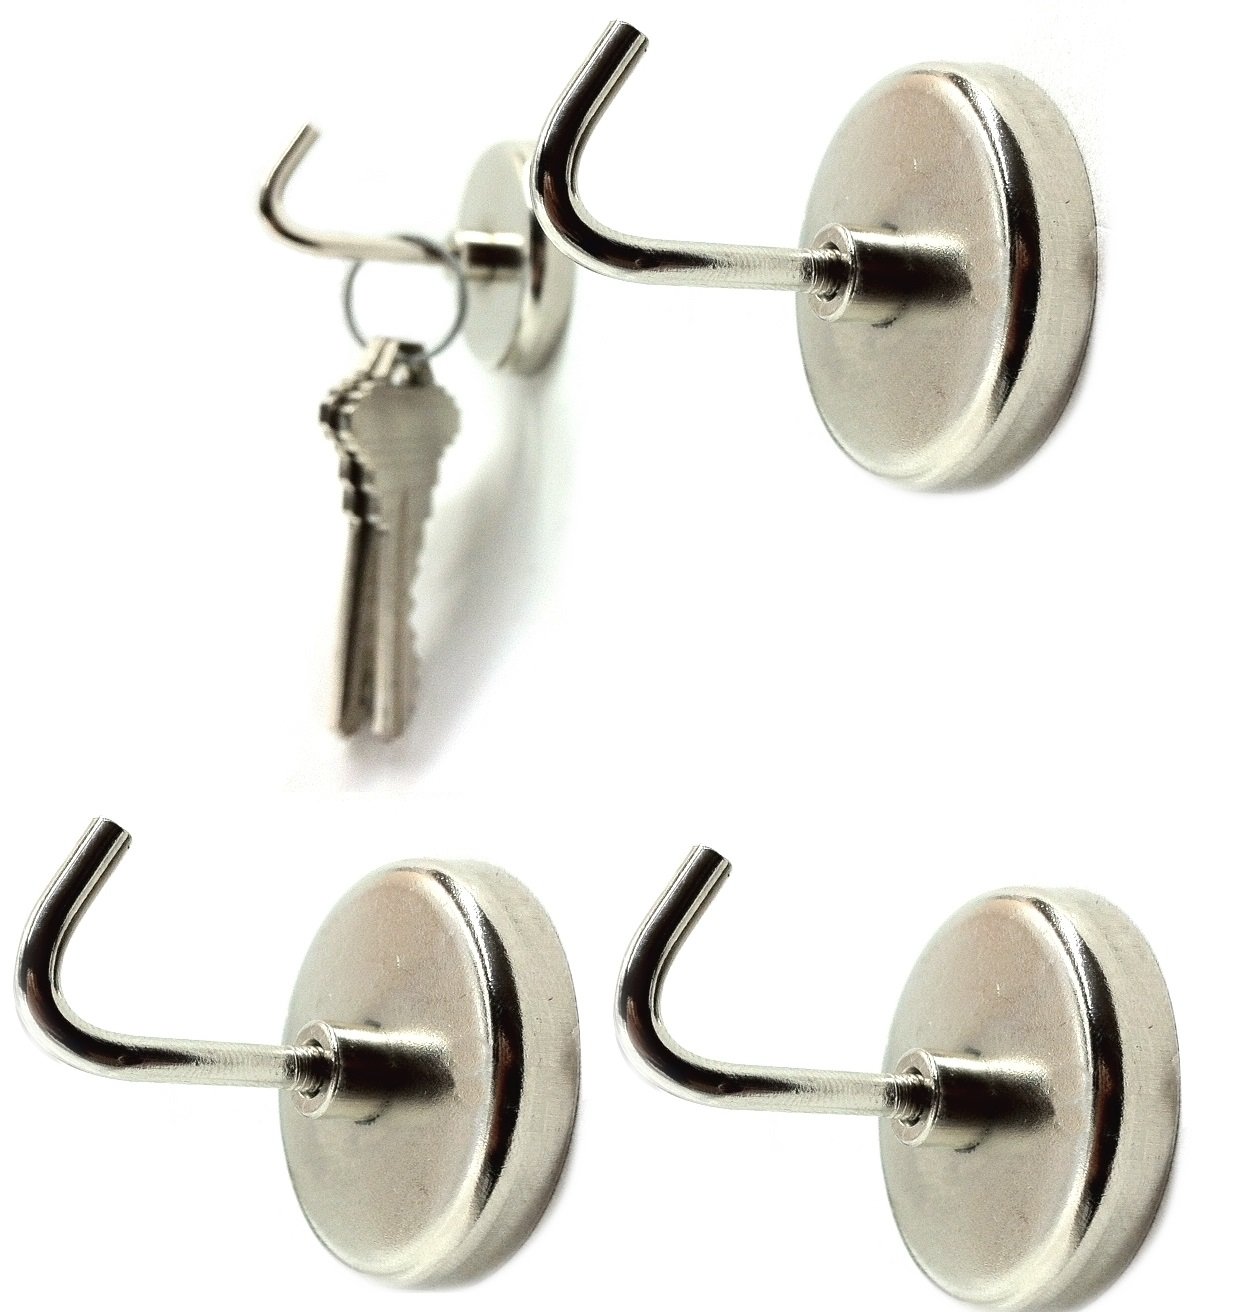 ROK 1-1/2-inch Industrial Magnetic Hooks, Pack of 10